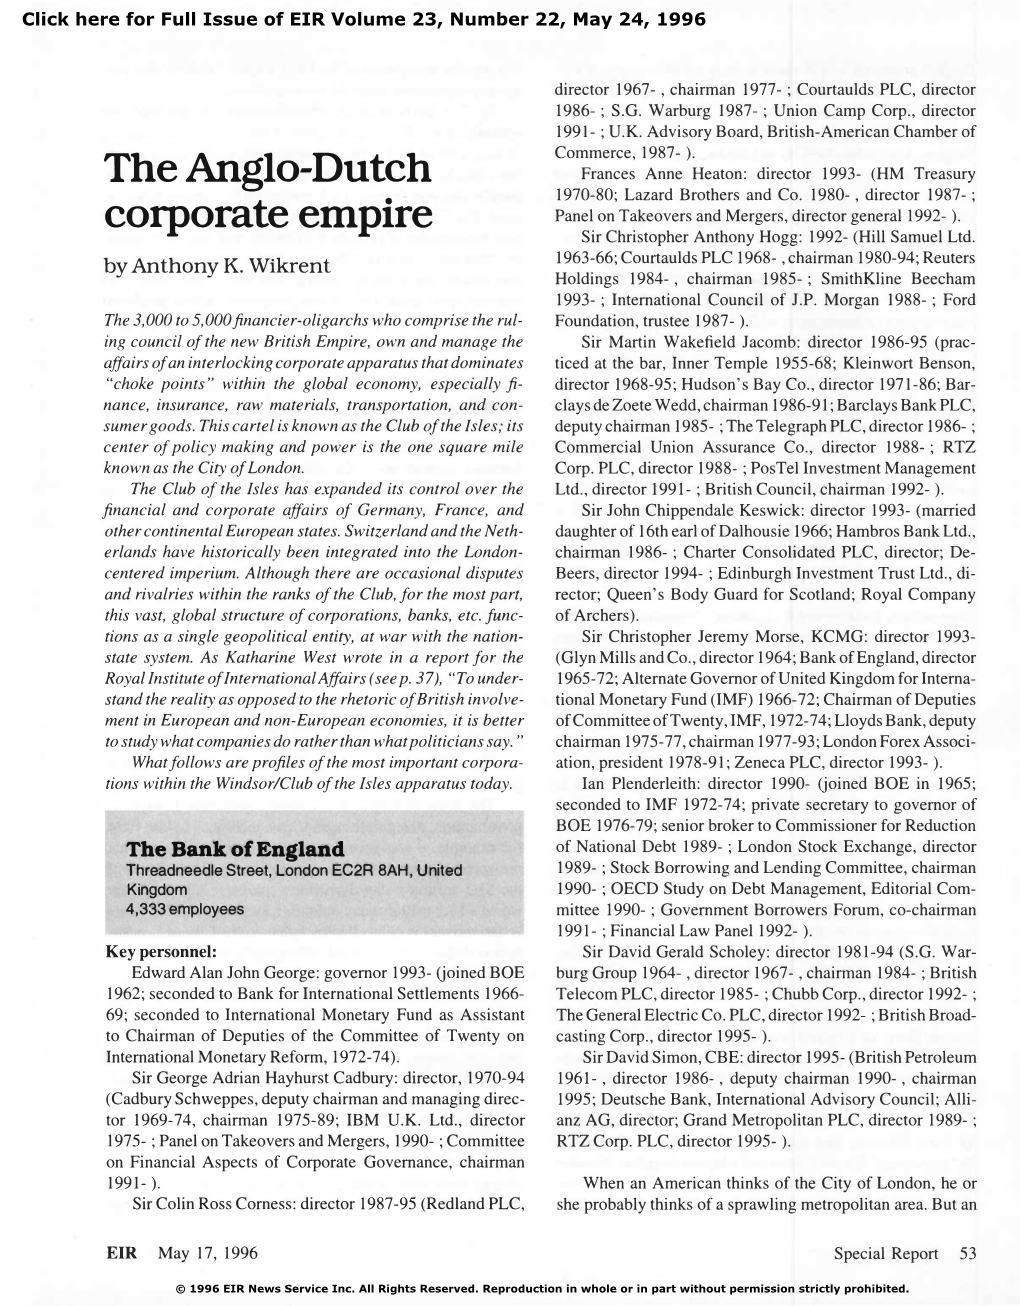 The Anglo-Dutch Corporate Empire